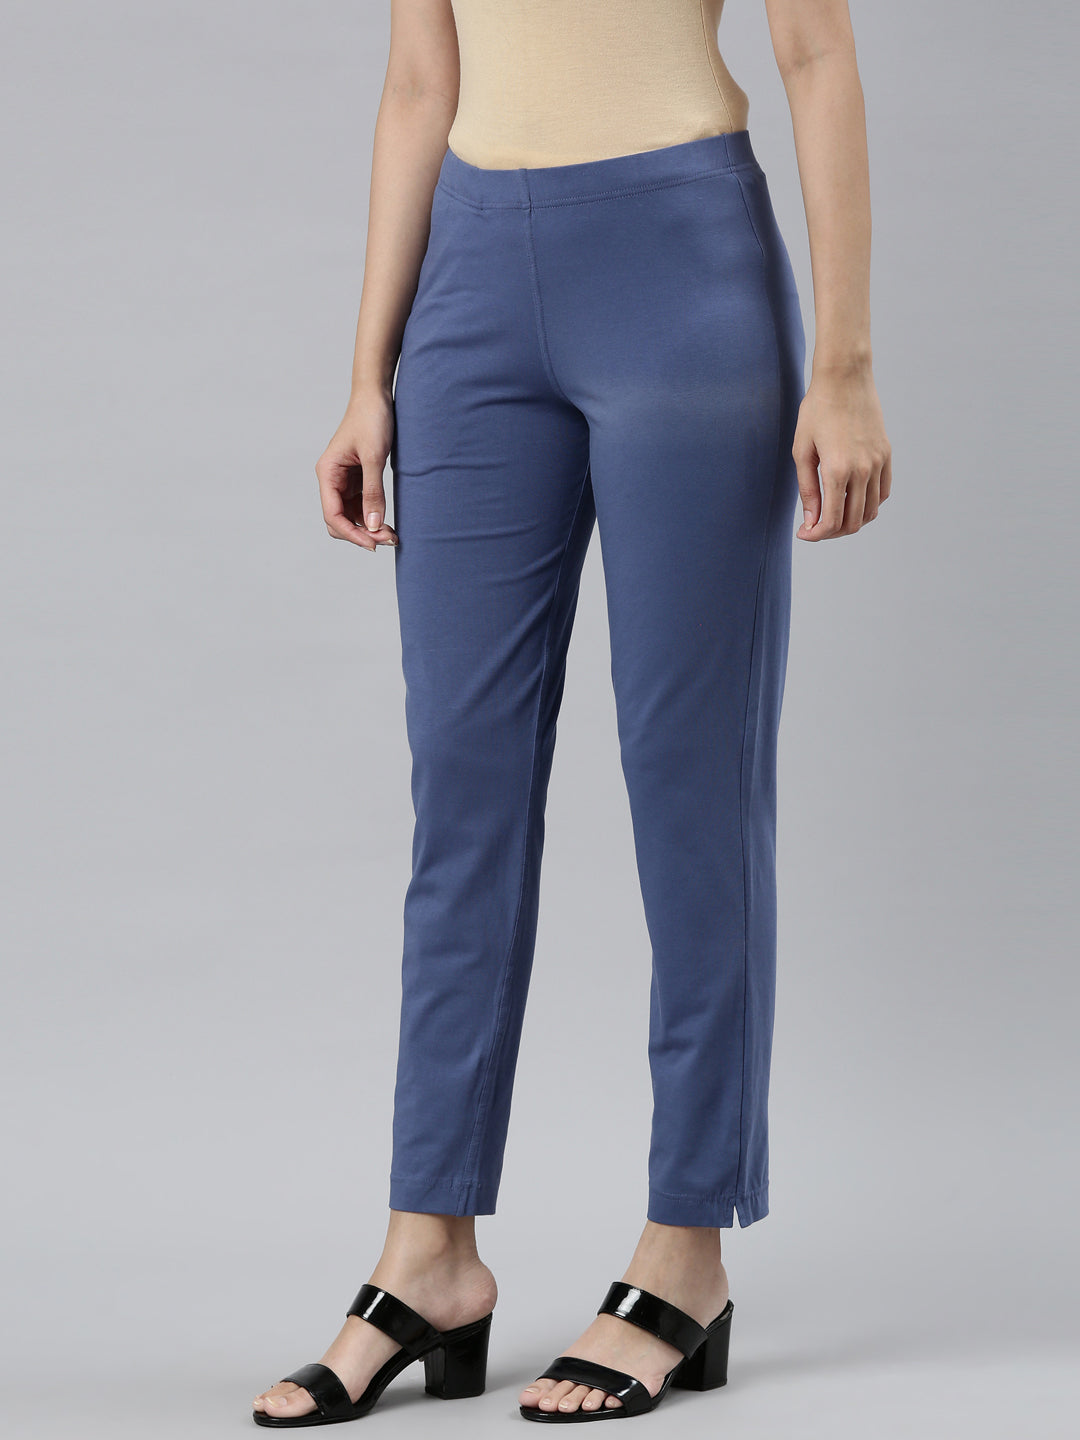 Elleven Trousers and Pants  Buy Elleven Blue Ankle Length Jersy Pants  Online  Nykaa Fashion